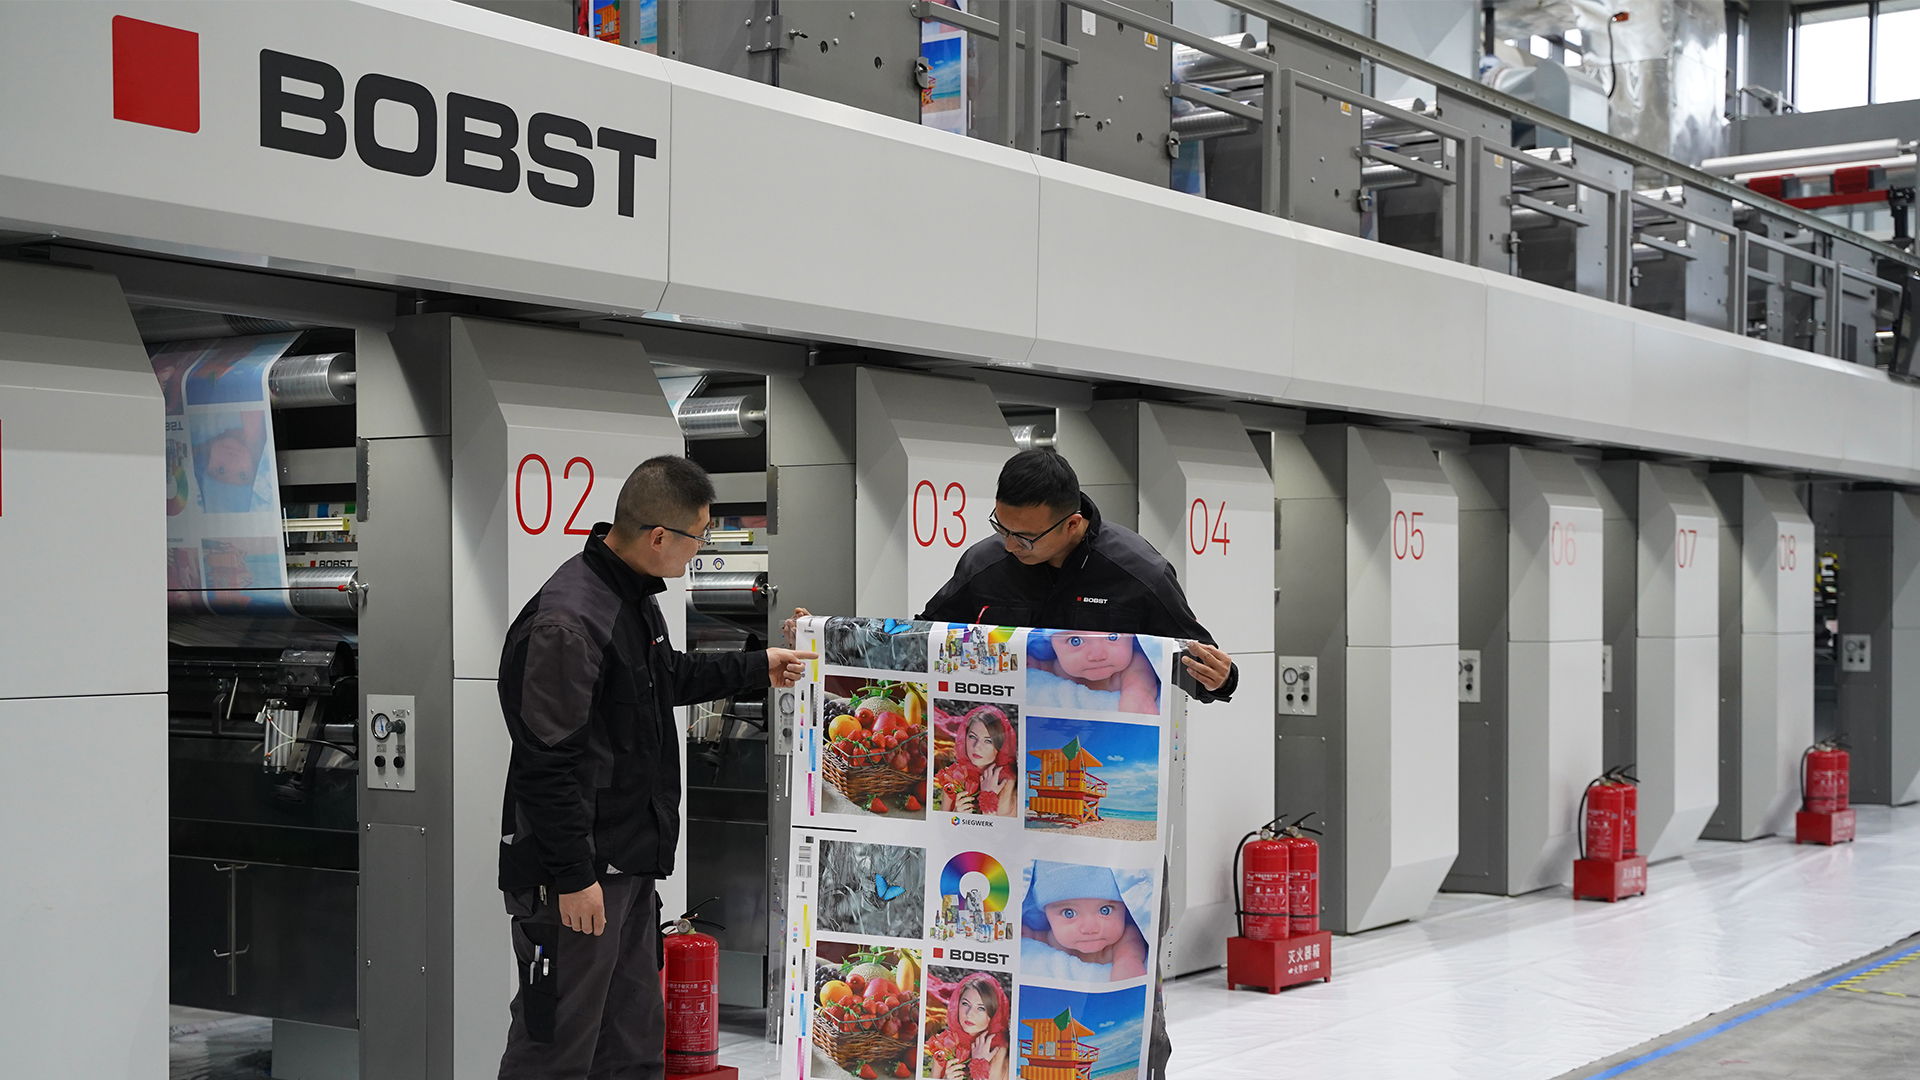 Messrs Shuhui Sun (right) and Bo Zhang (left), process engineers at Bobst Changzhou, examining the technical print sample printed with Siegwerk water-based inks in Bobst (Changzhou) Competence Center.